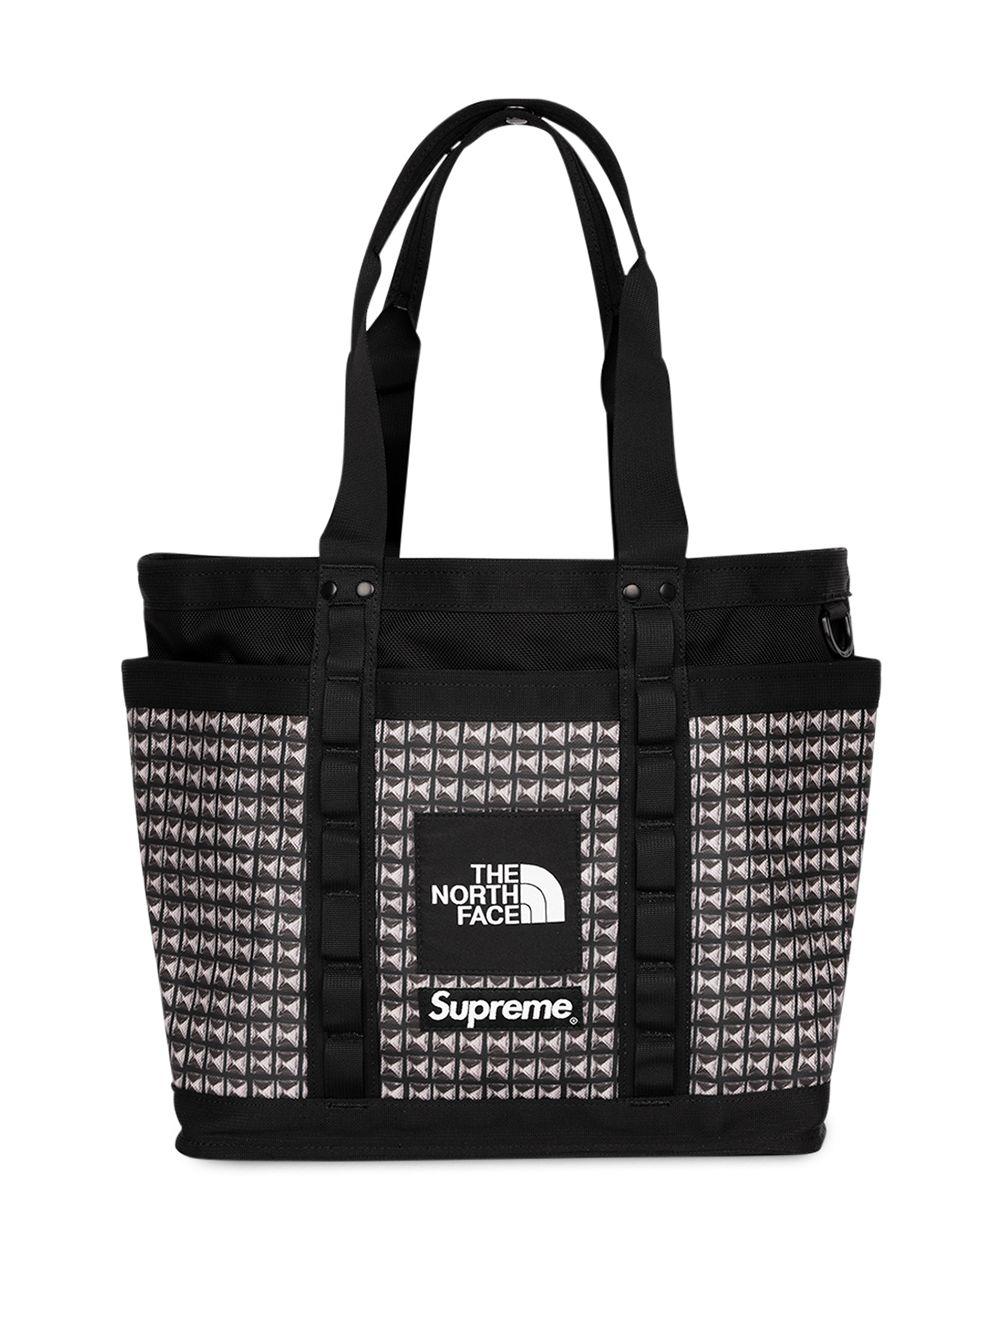 Supreme X The North Face Studded Explore Utility Tote Bag in Black 